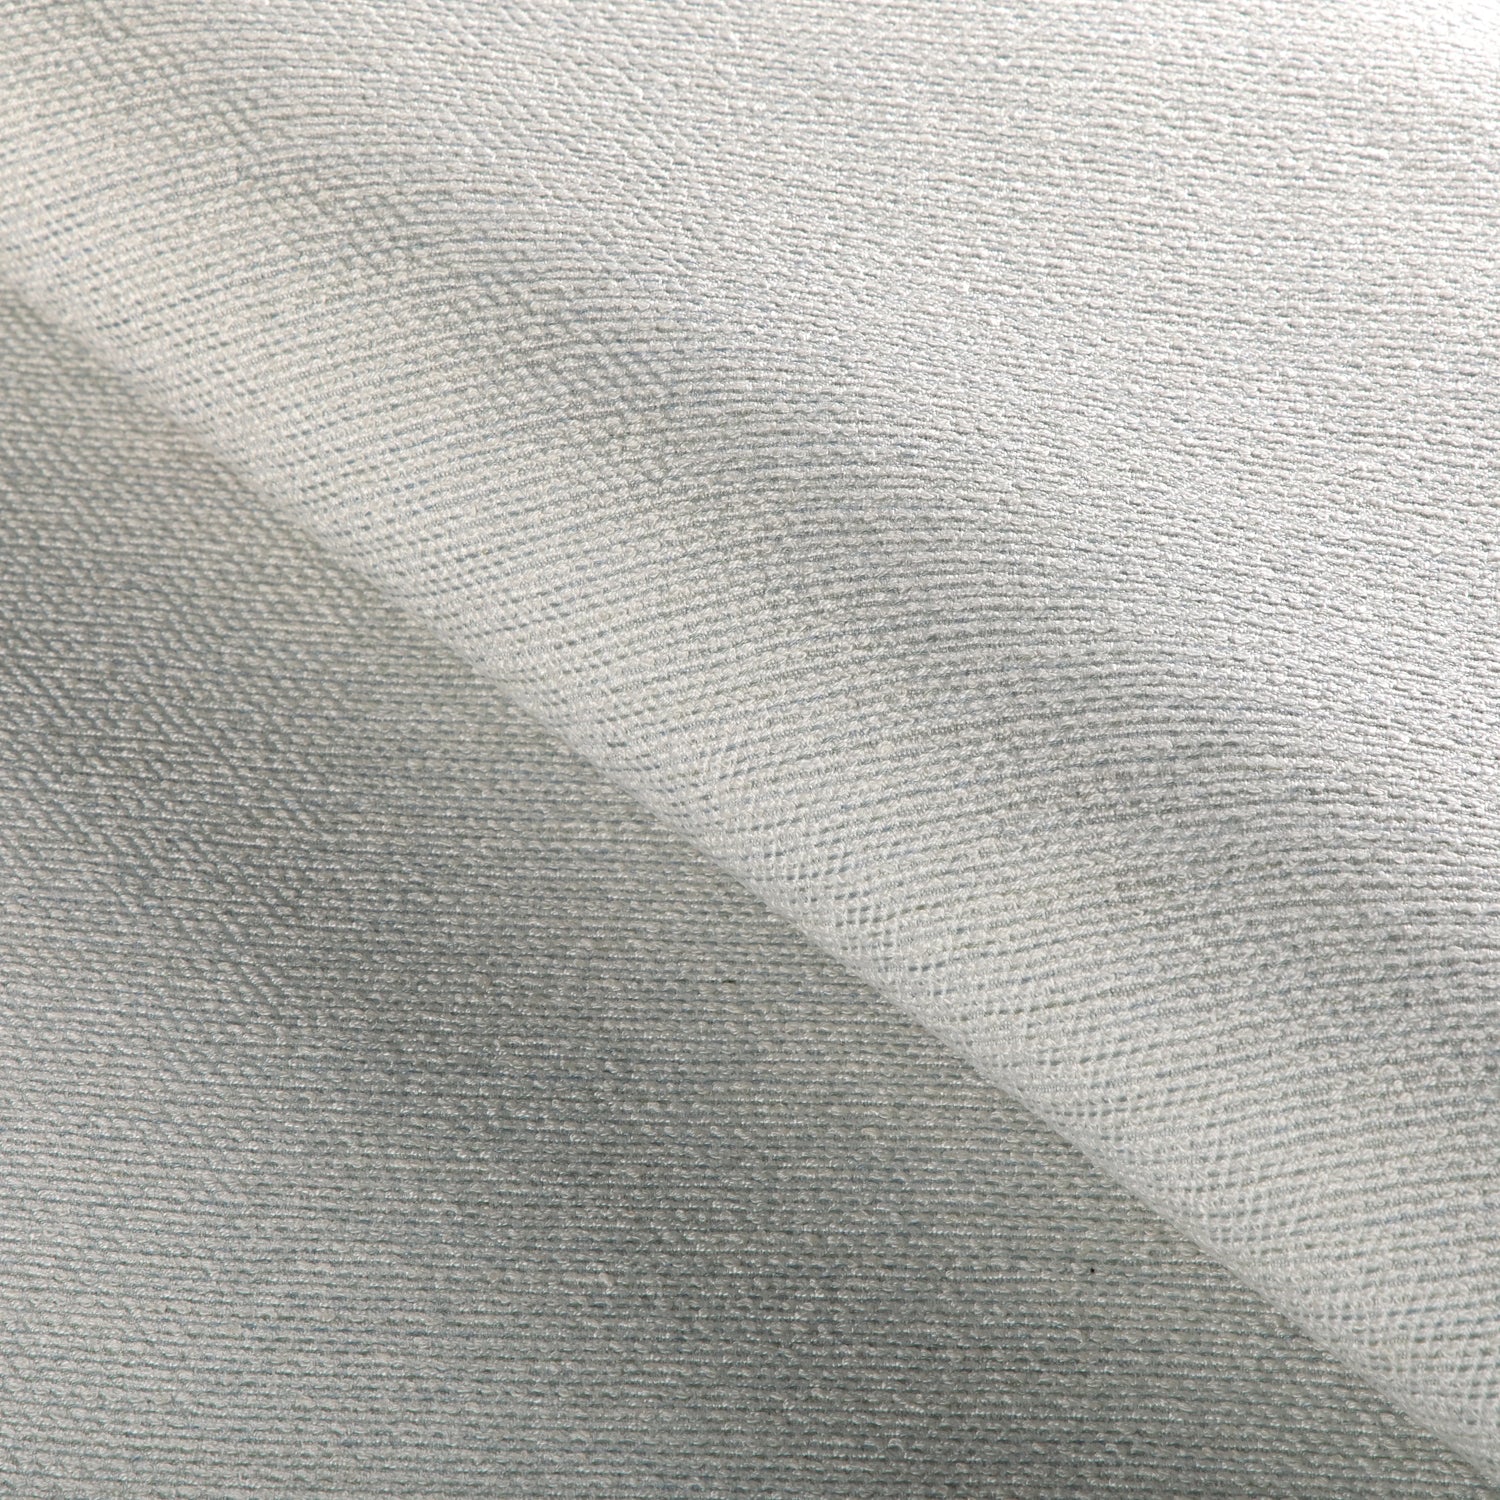 Alternate texture view of Chatham Texture fabric in seaglass color - pattern 36935.15.0 - by Kravet Couture in the Riviera collection